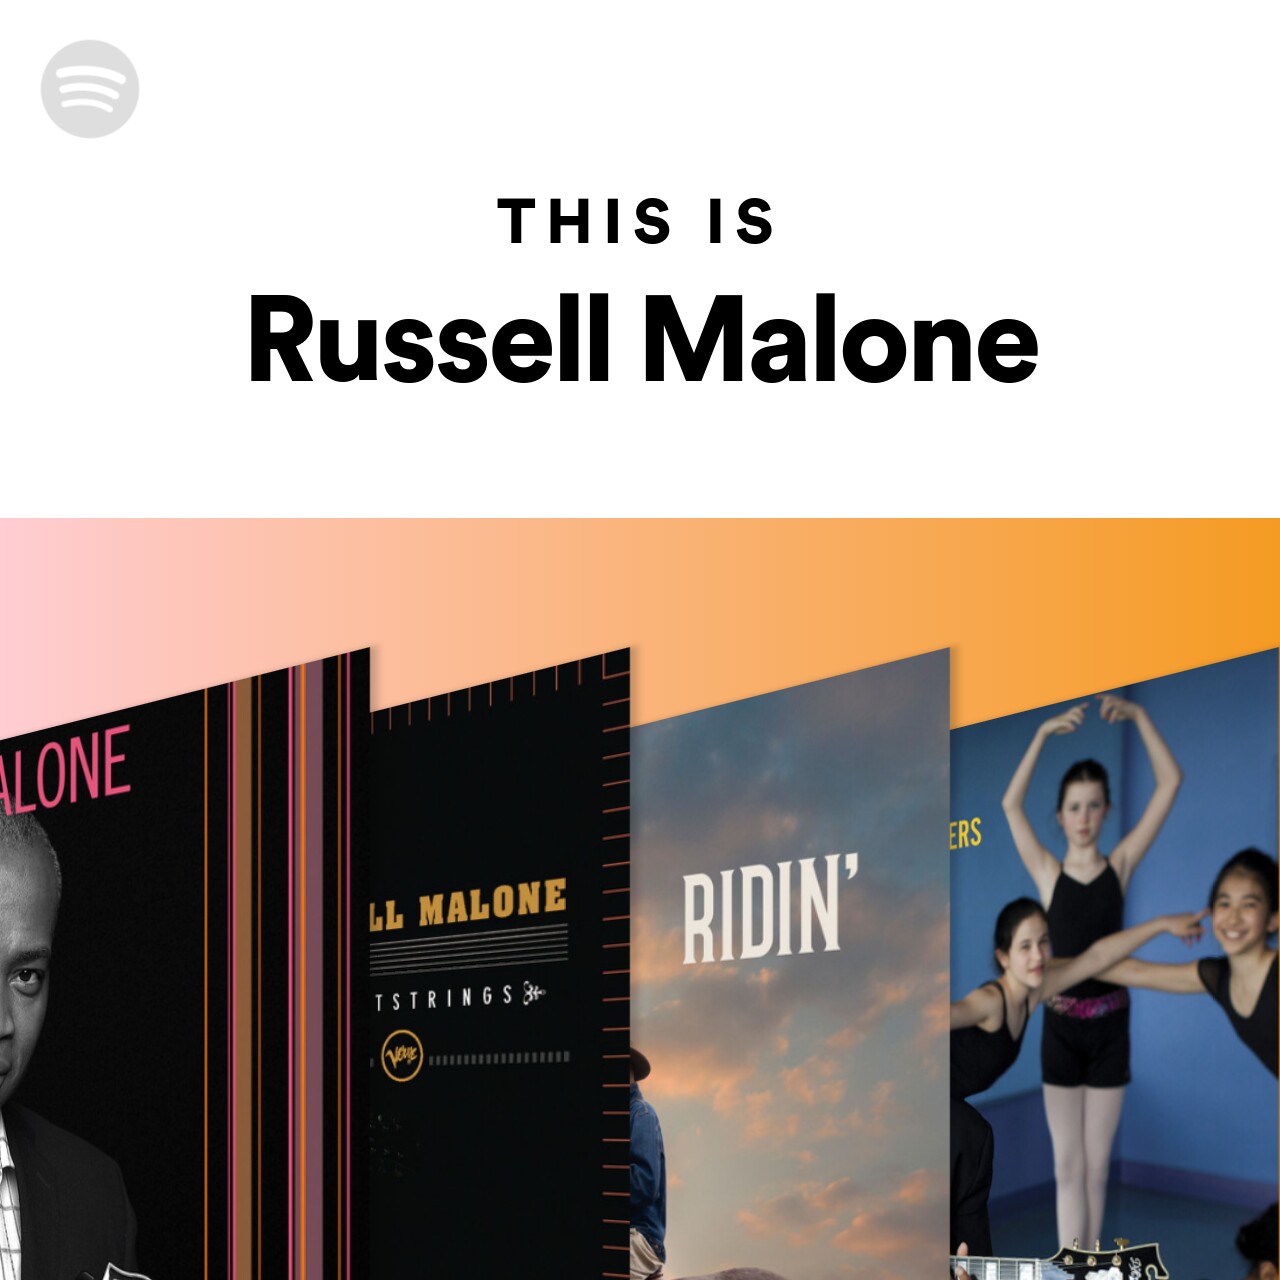 This Is Russell Malone